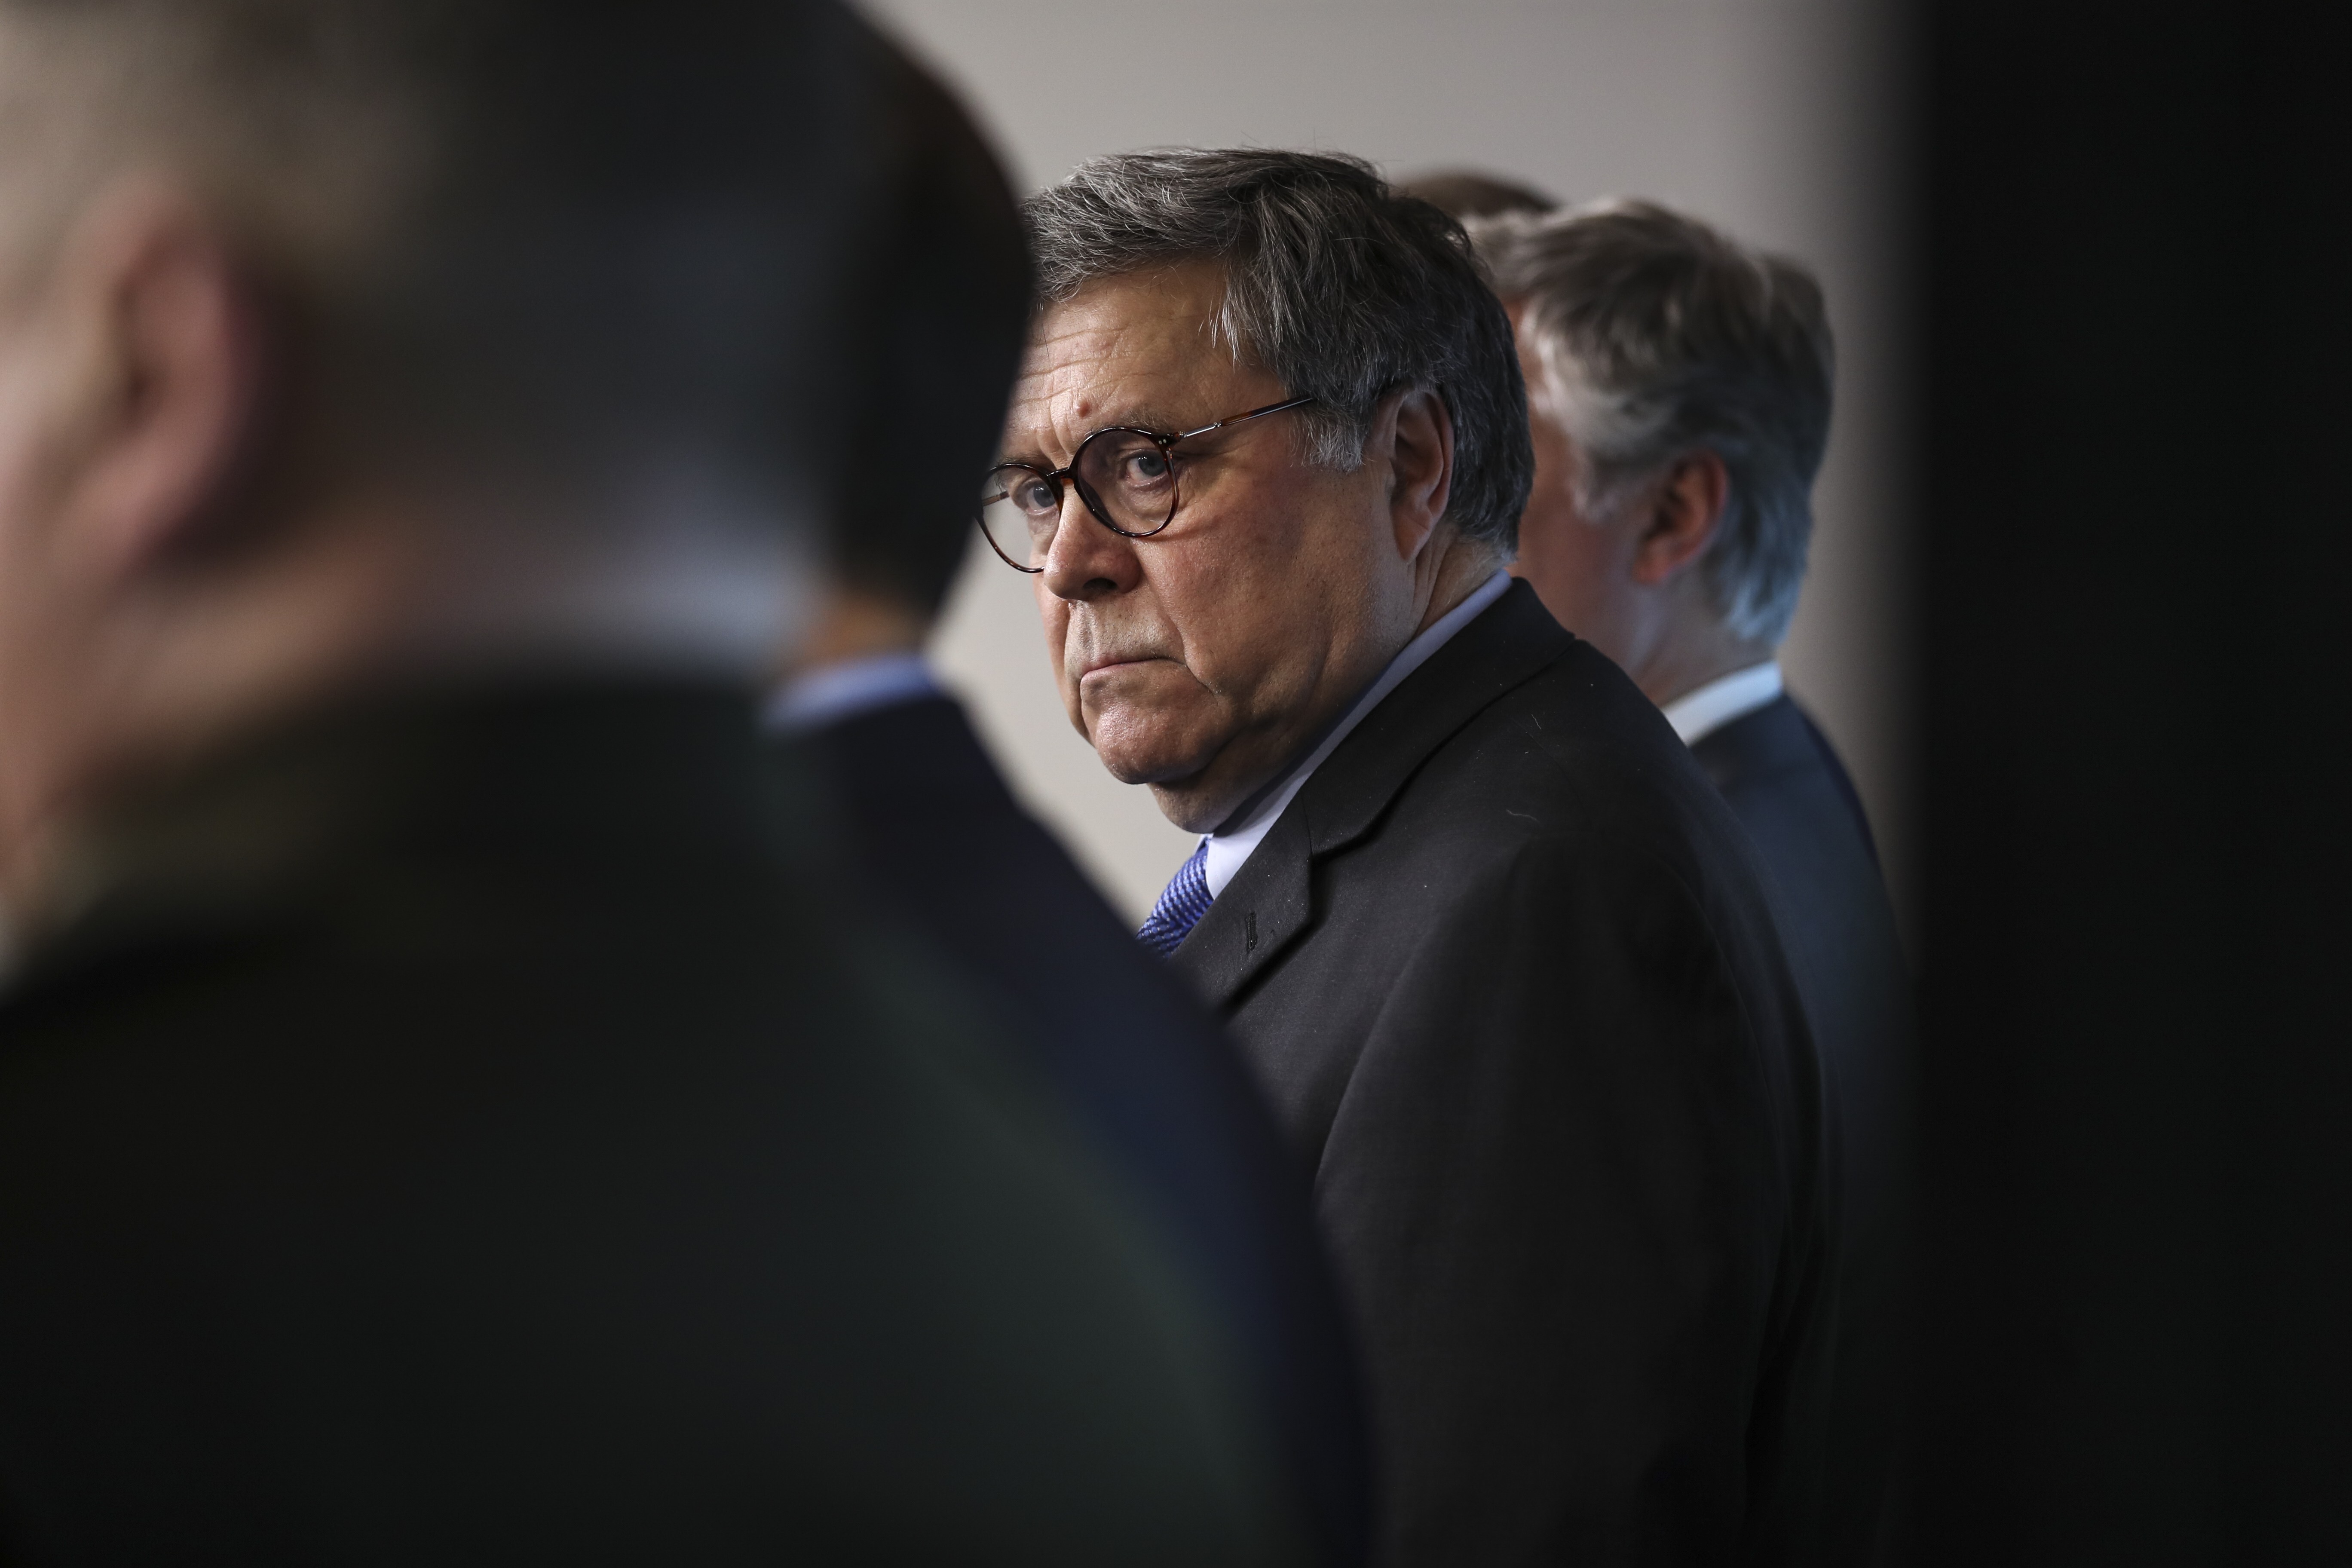 Attorney General William Barr listens during a coronavirus task force press briefing at the White House. Photo: Bloomberg